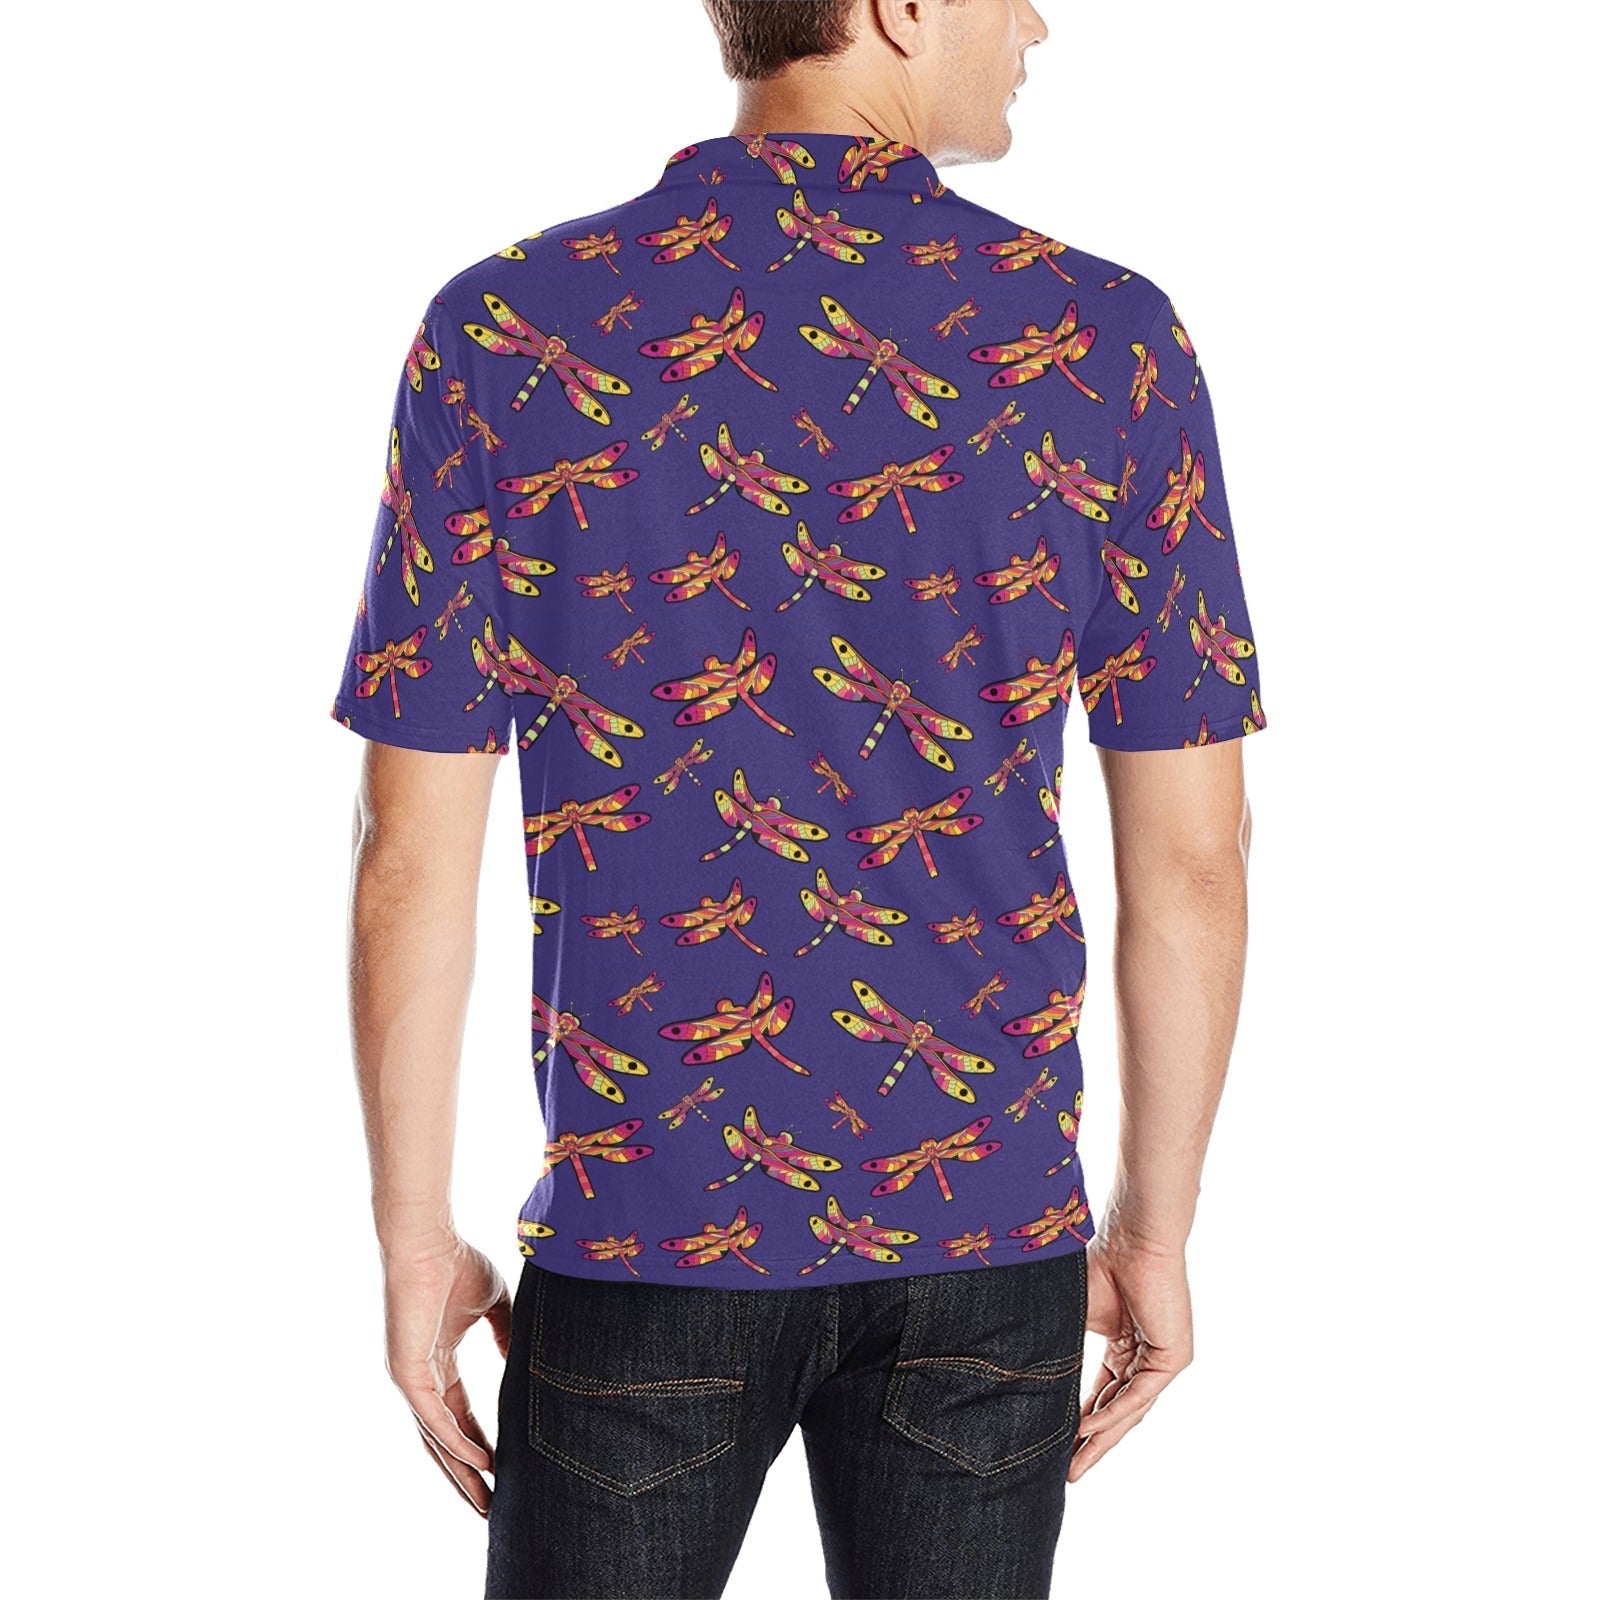 Gathering Purple Men's All Over Print Polo Shirt (Model T55) Men's Polo Shirt (Model T55) e-joyer 